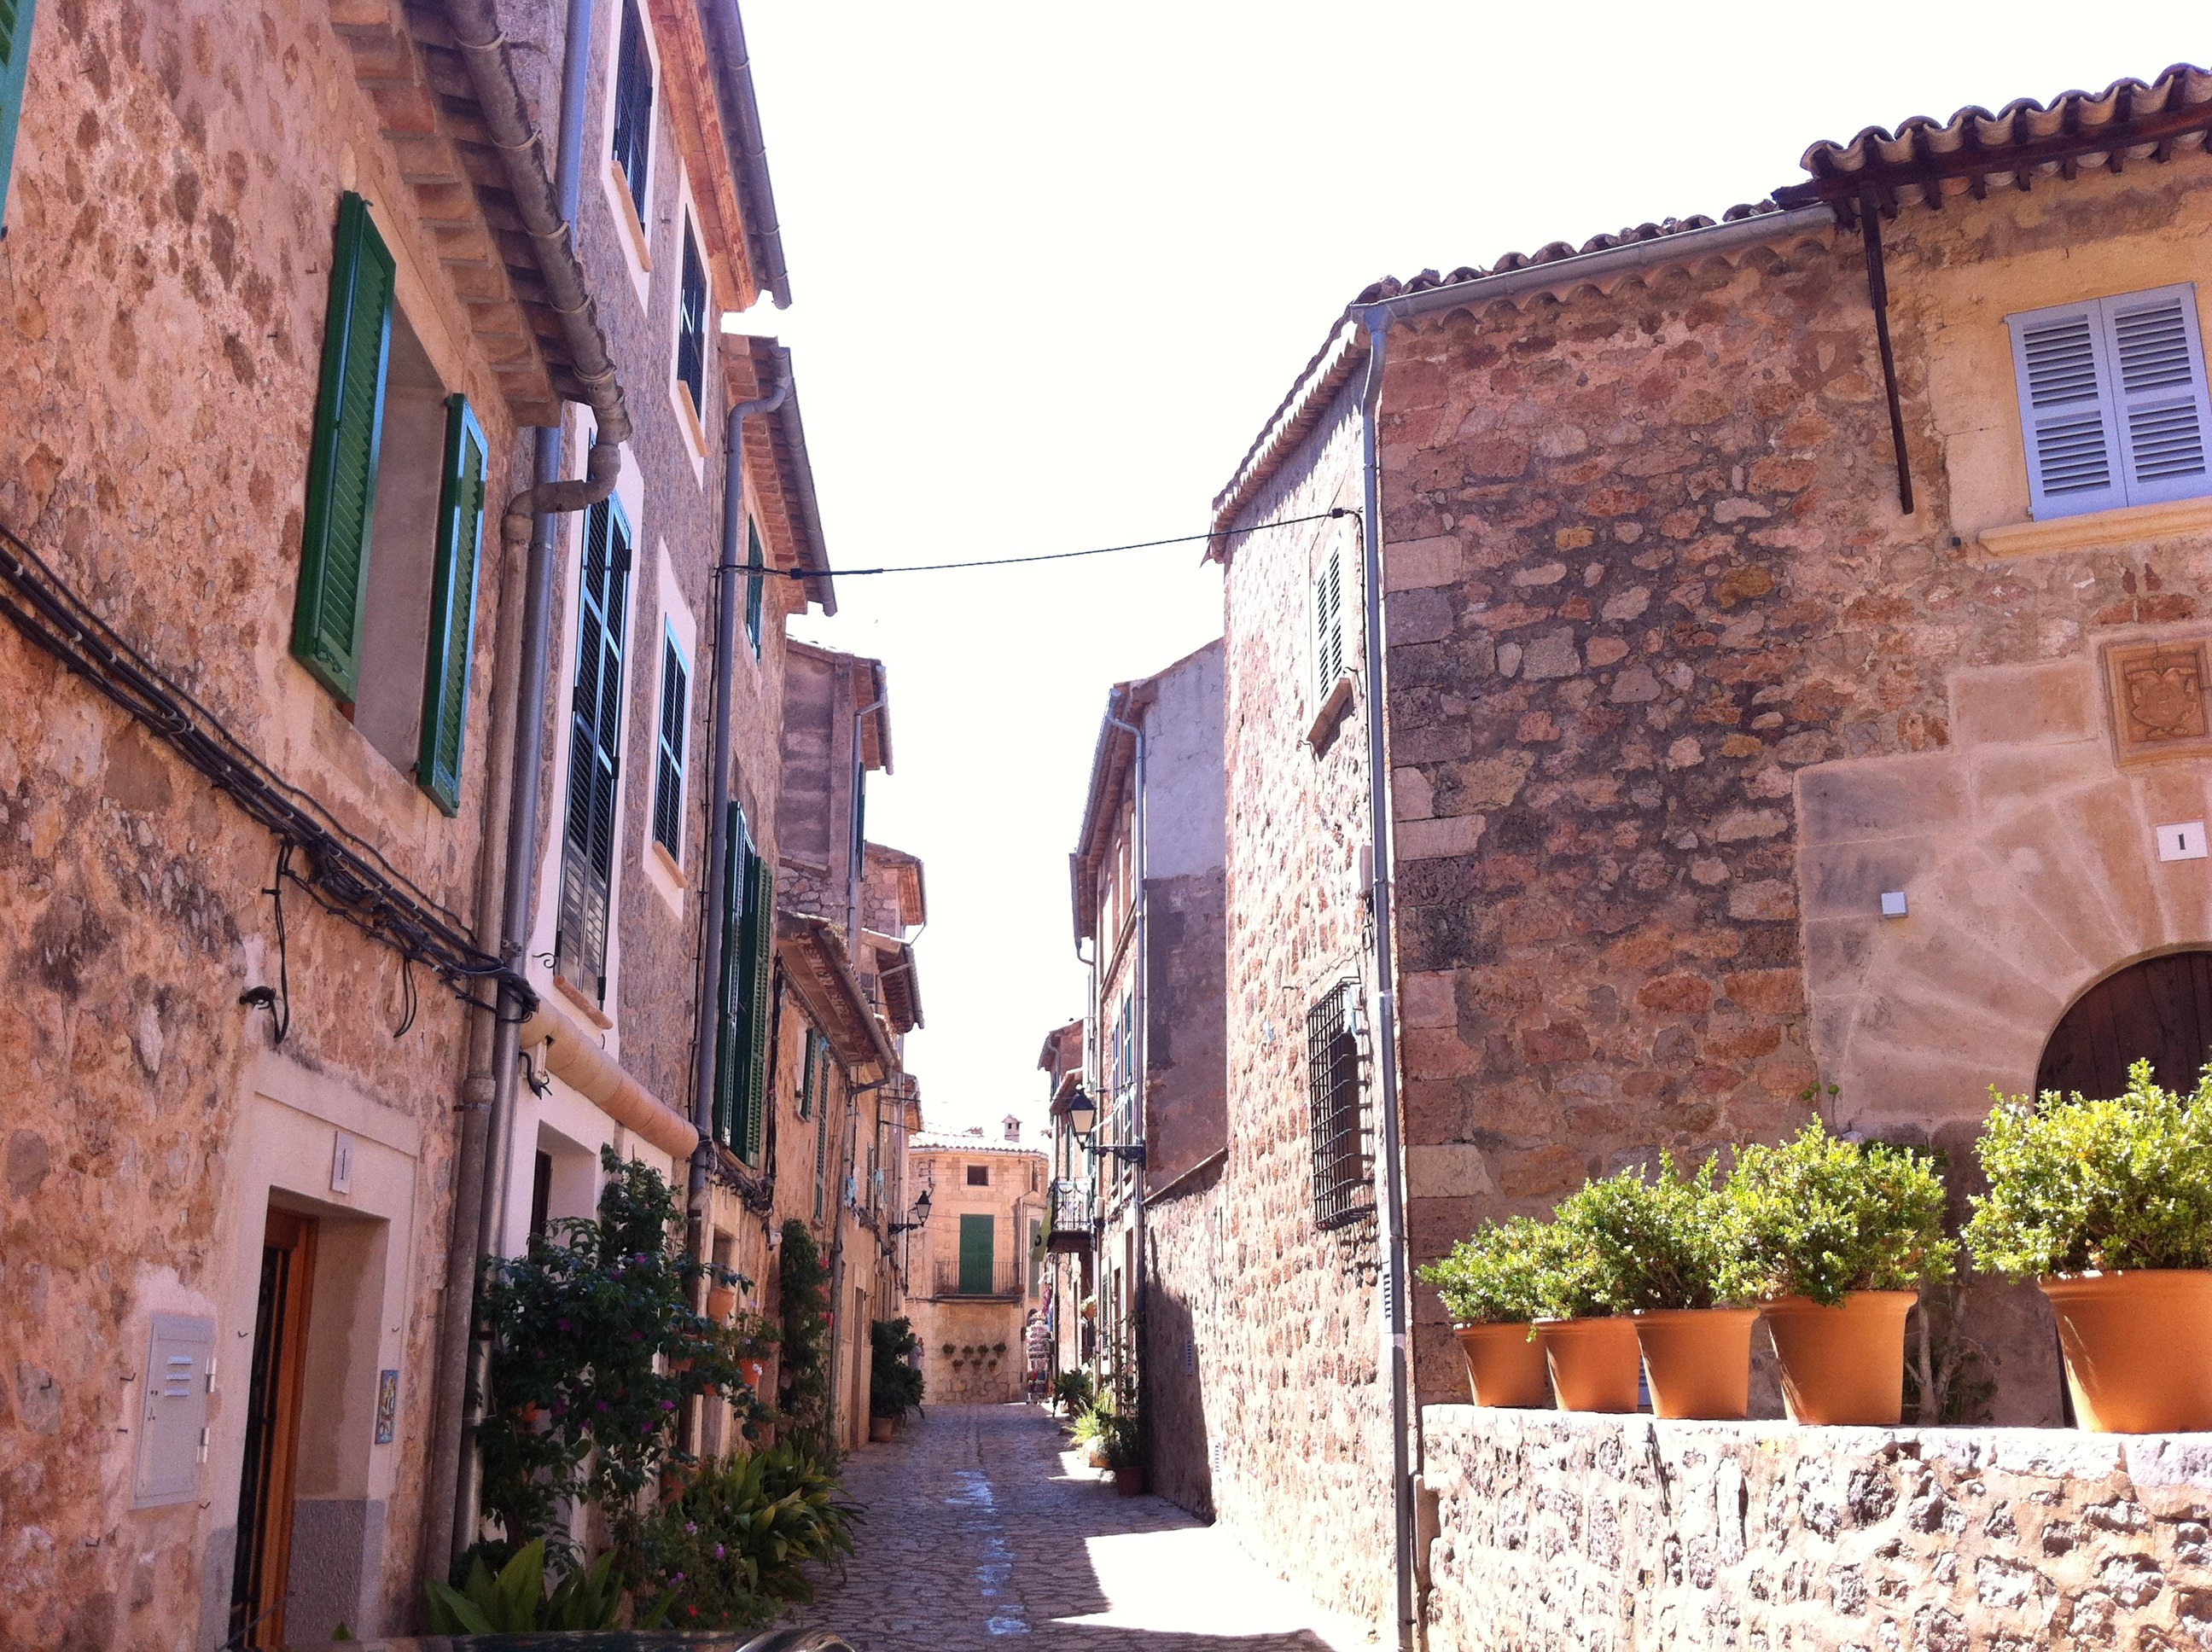 Old picturesque alley in village, spain, mallorca free image download